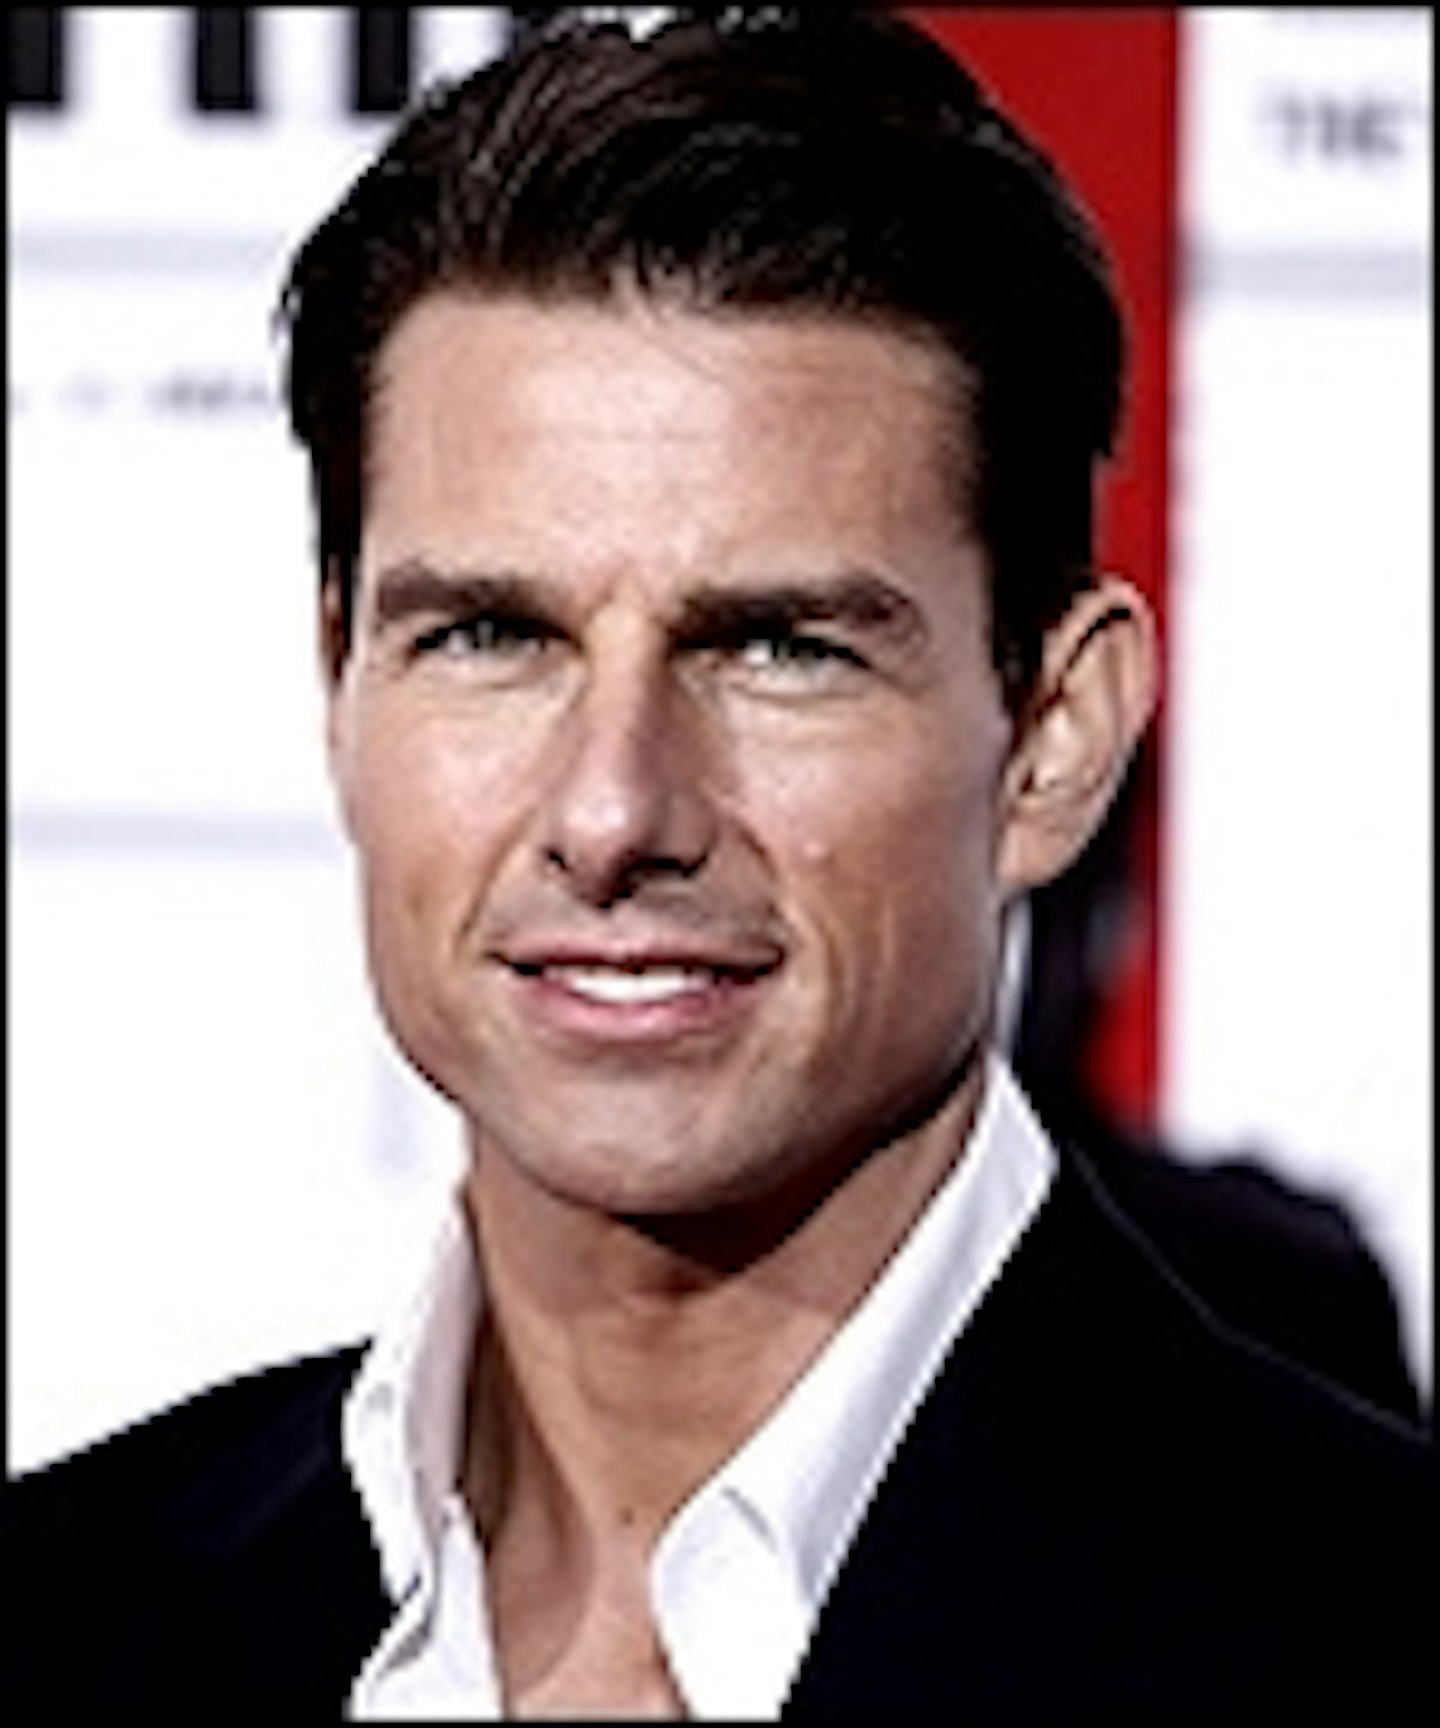 Tom Cruise Offered Rock Of Ages Role